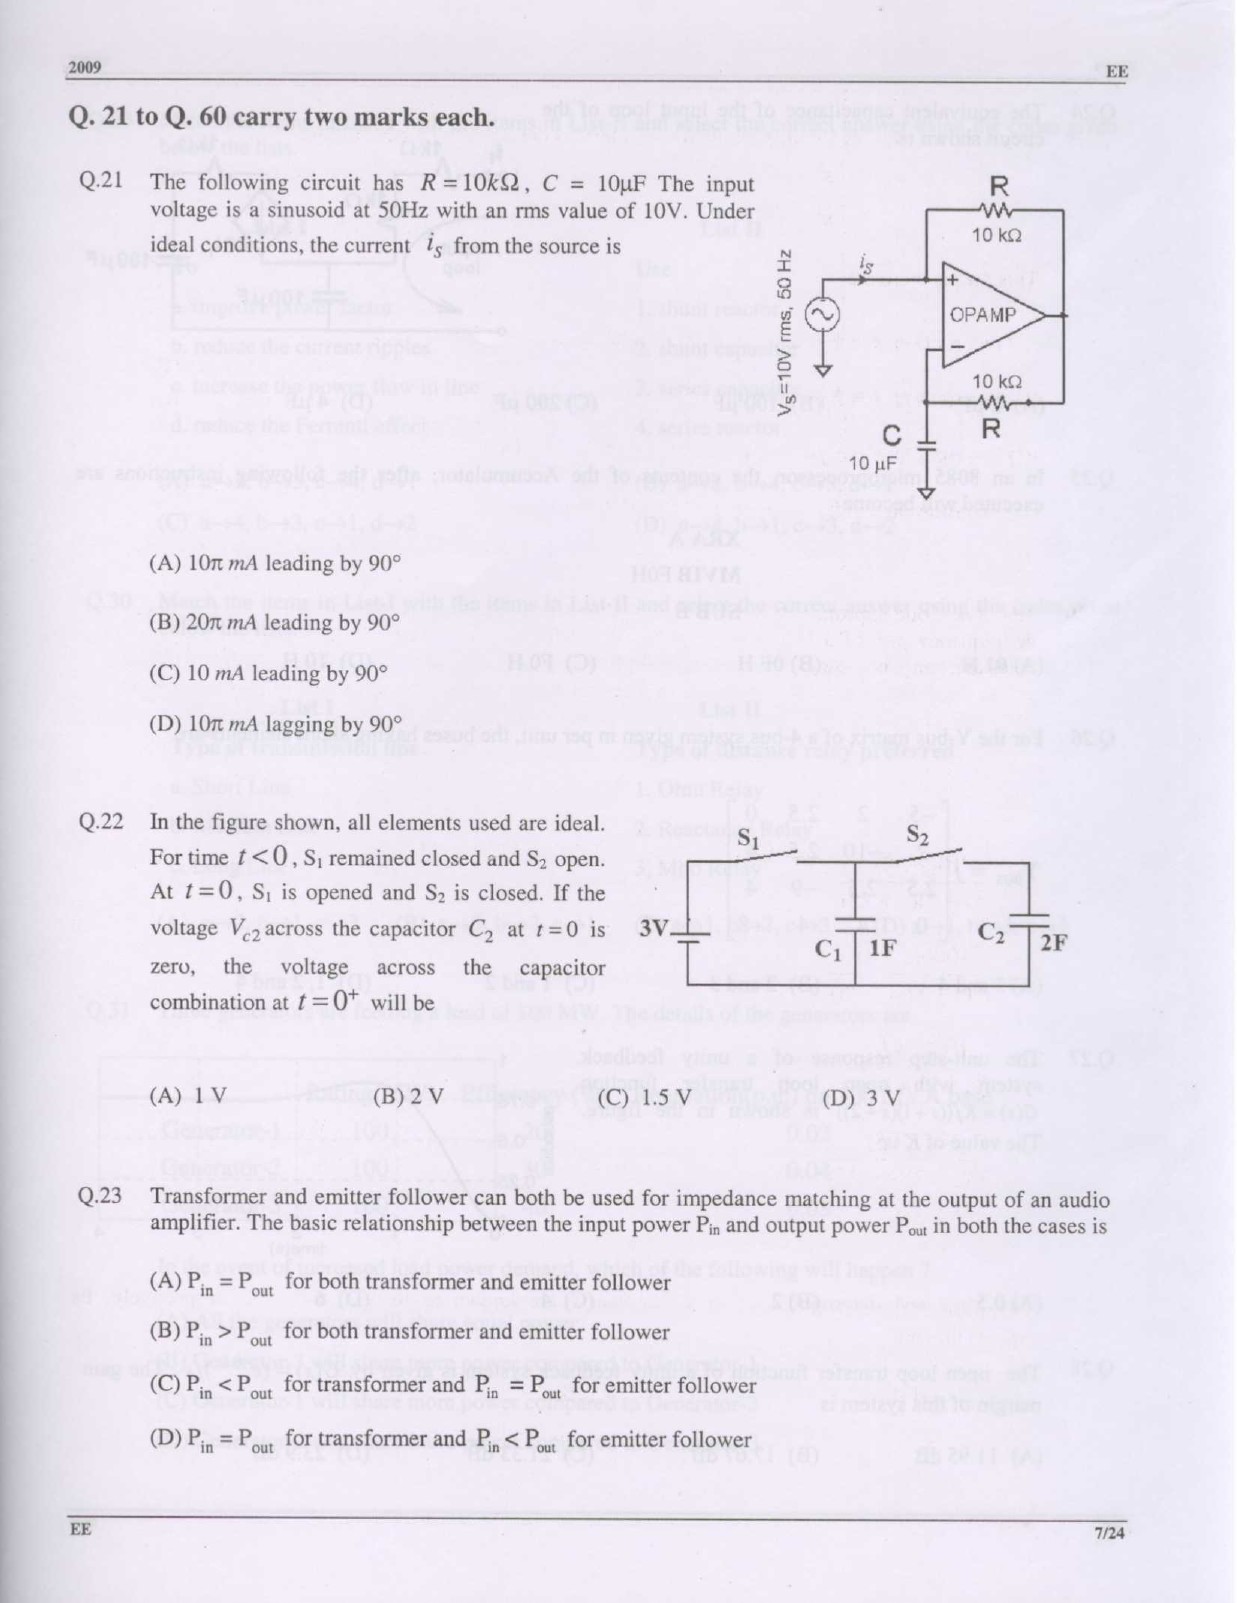 GATE Exam Question Paper 2009 Electrical Engineering 7